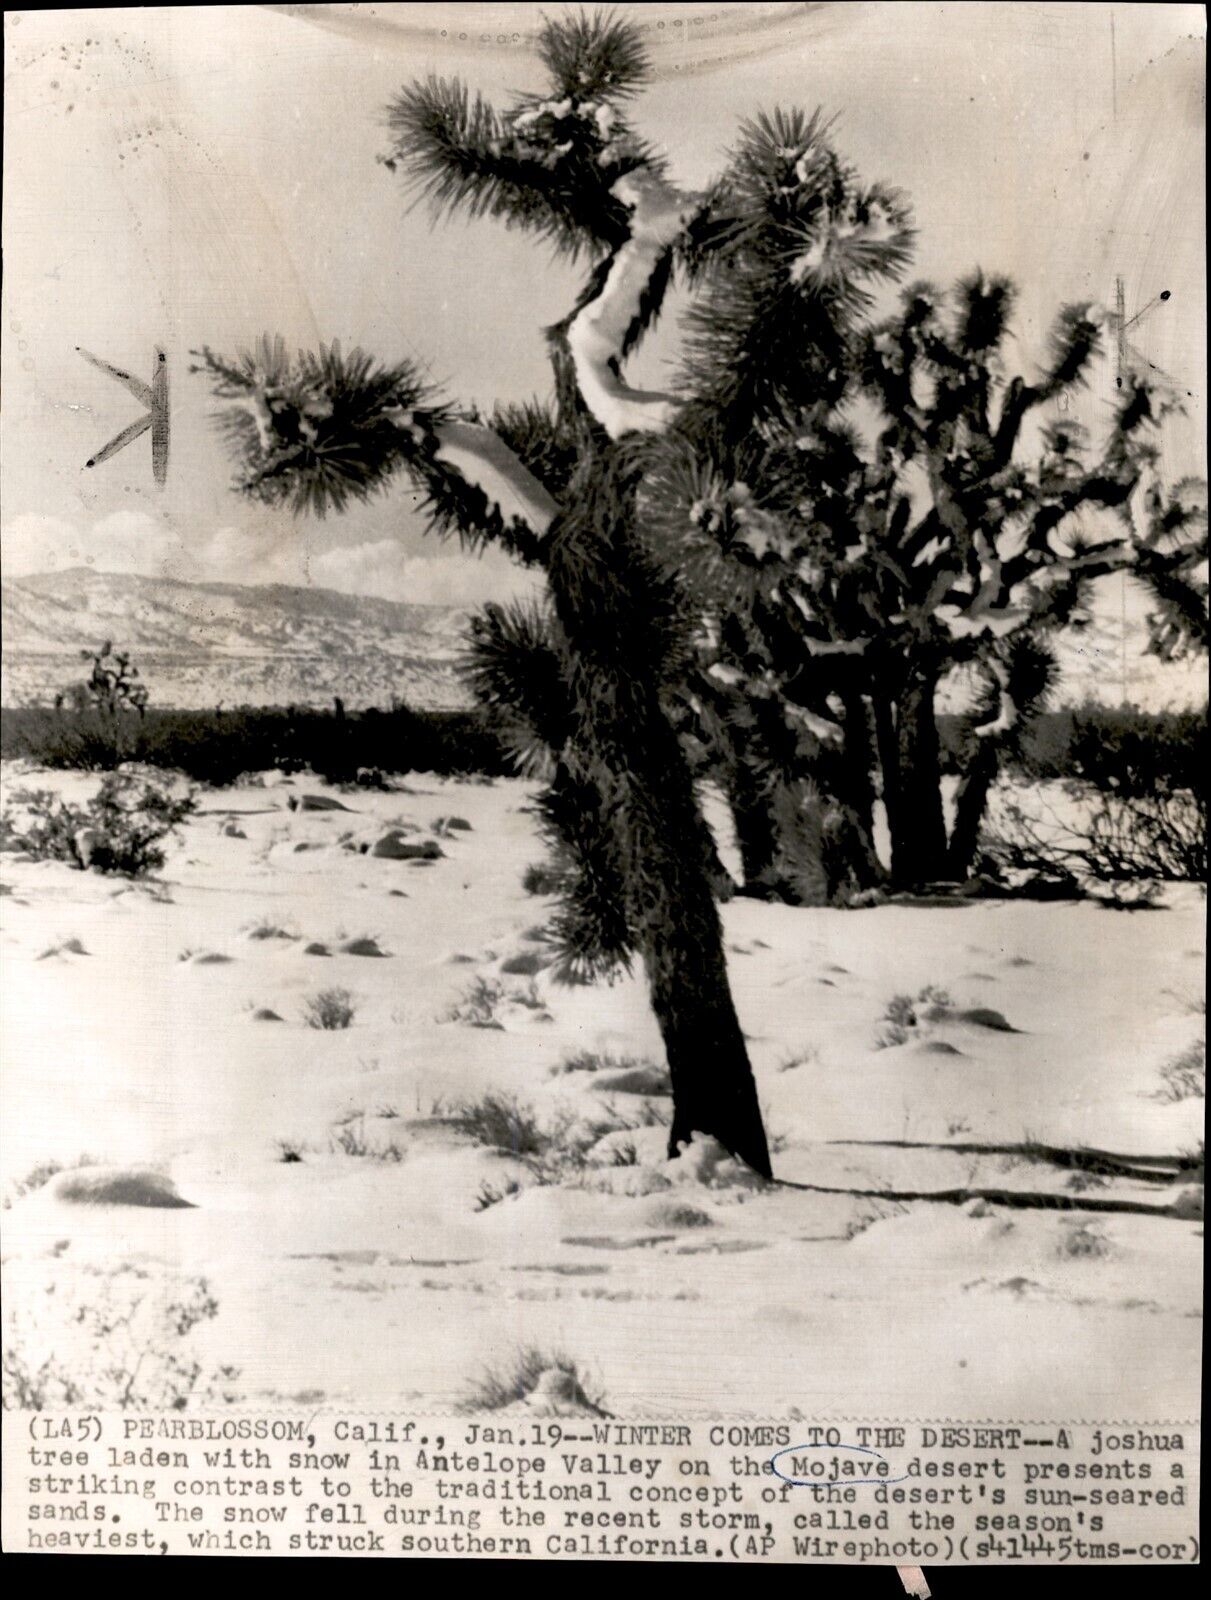 LG5 1955 AP Wire Photo WINTER COMES TO MOJAVE DESERT JOSHUA TREE COVERED IN SNOW